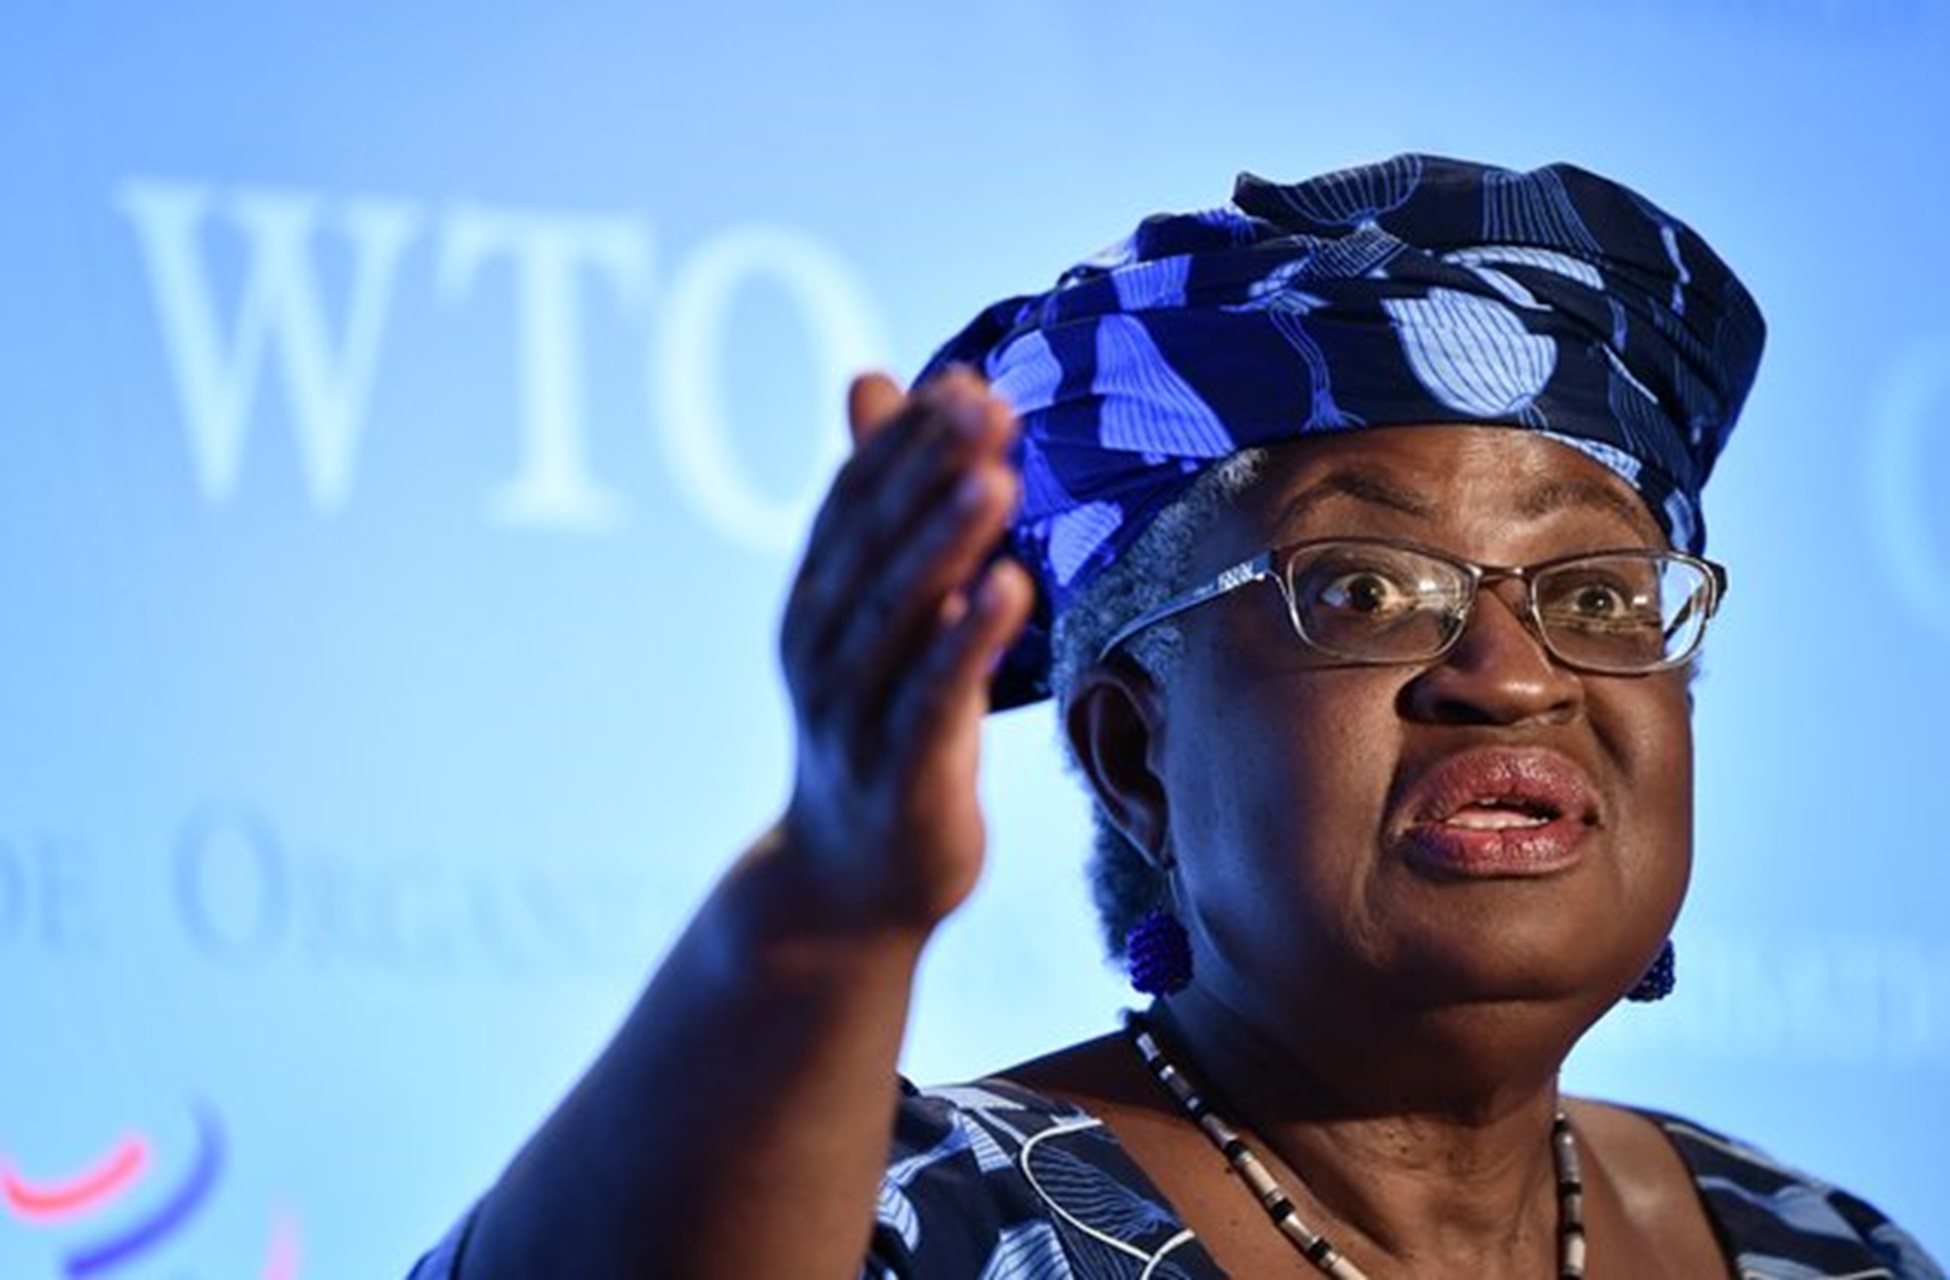 Dr. Ngozi Okonjo-Iweala is the first of African descent to be appointed to oversee the rules of the world trading system